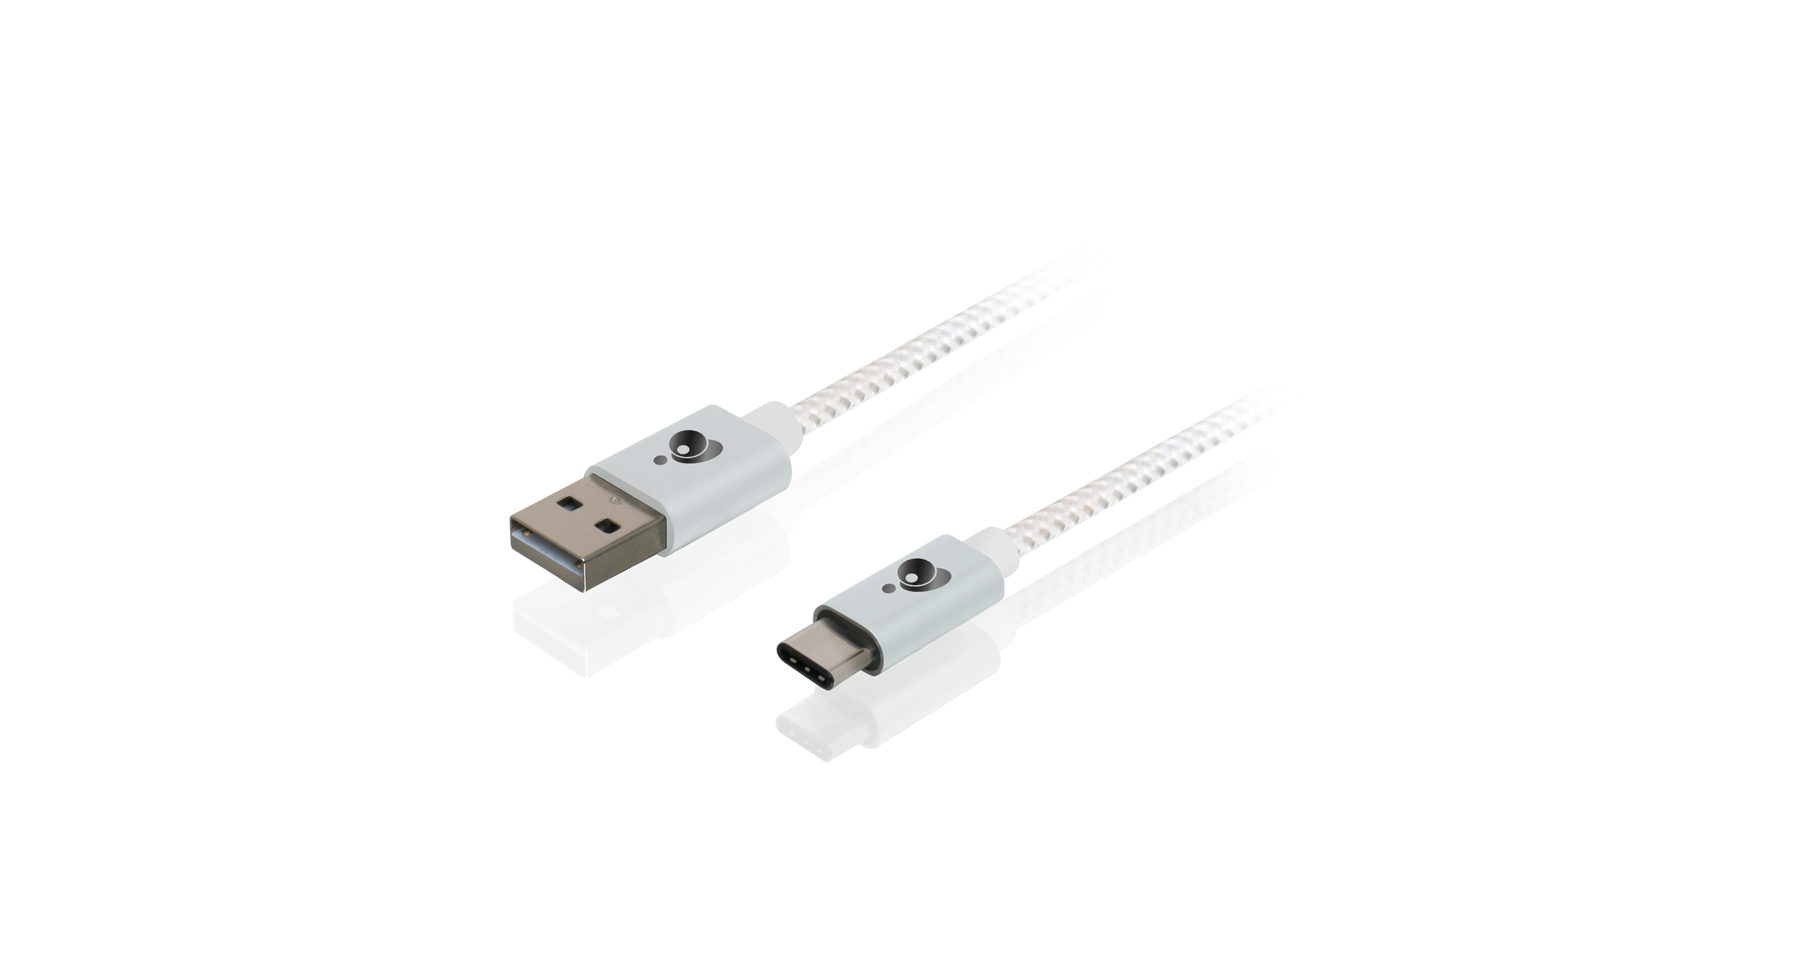 IOGEAR USB 3.0 Type-C Male to Type-A Female Charge